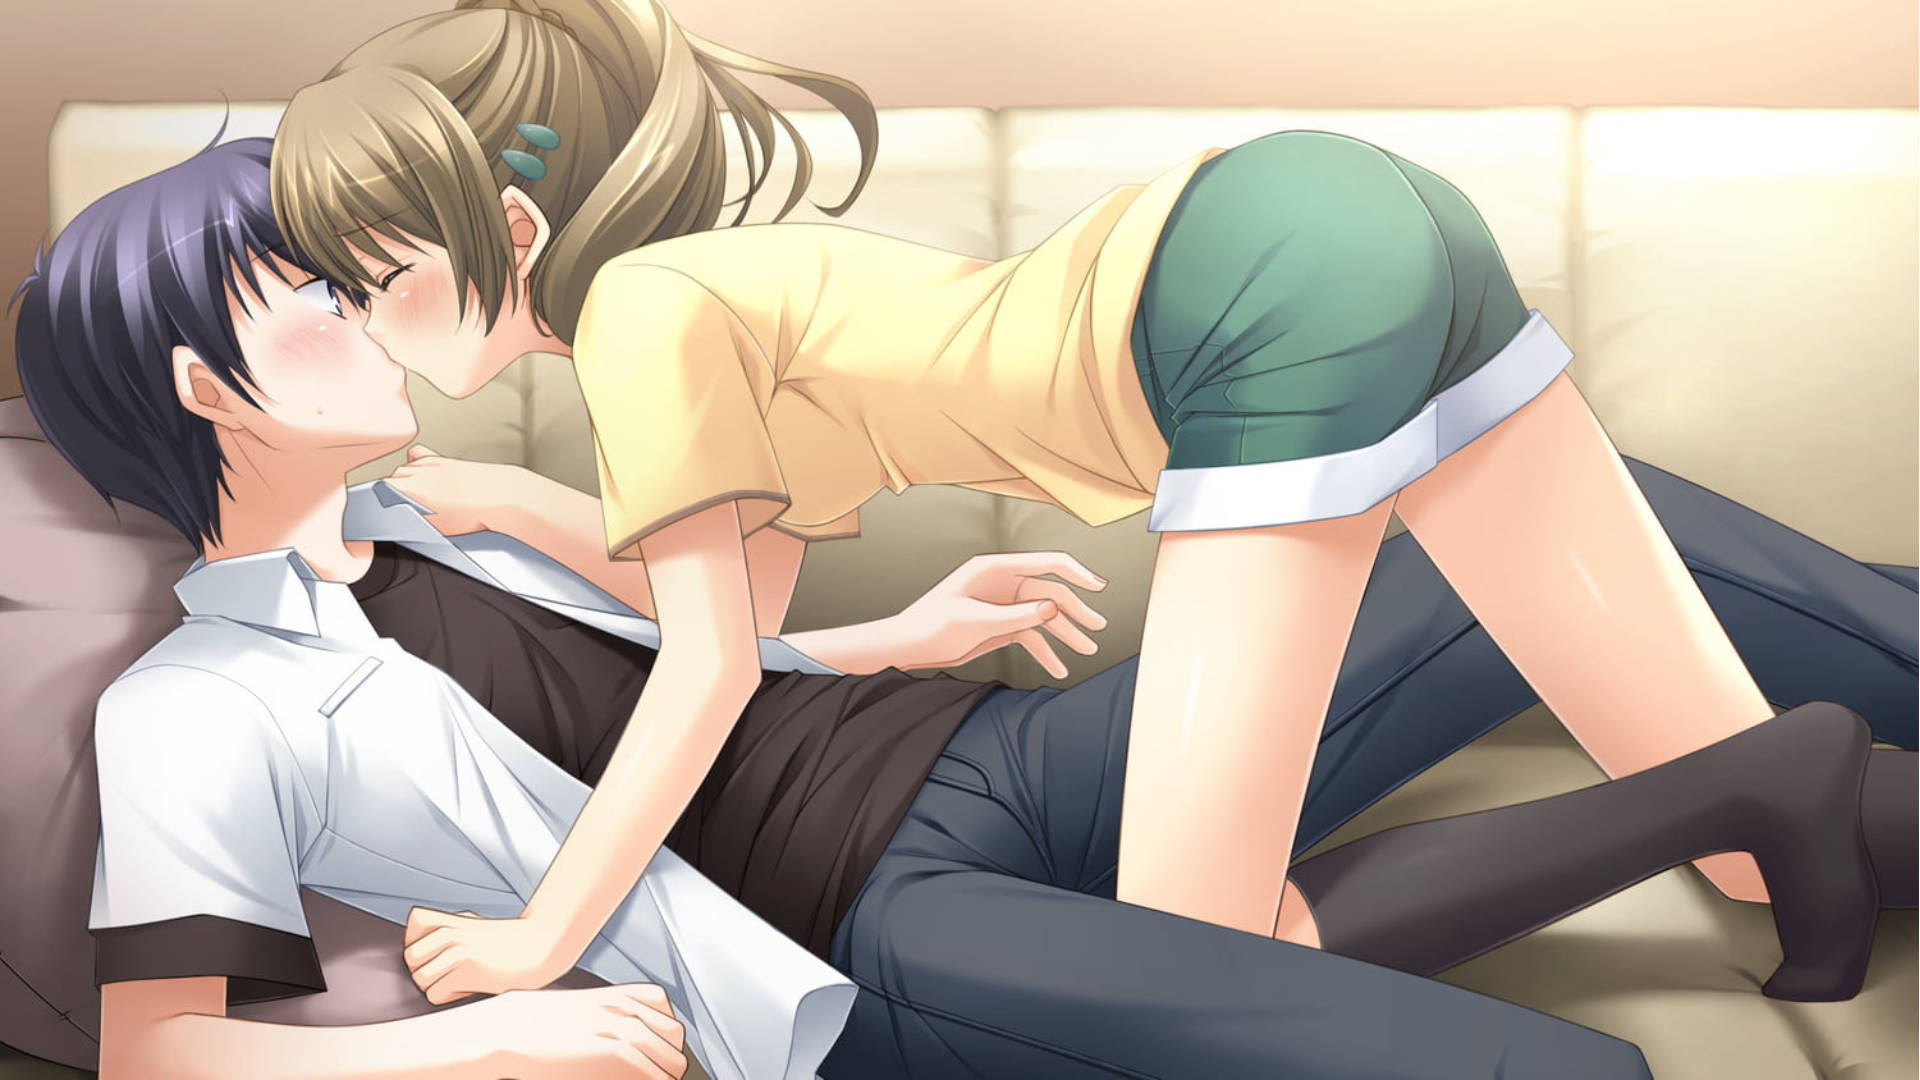 Download Anime Couple Kiss On A Couch Wallpaper 